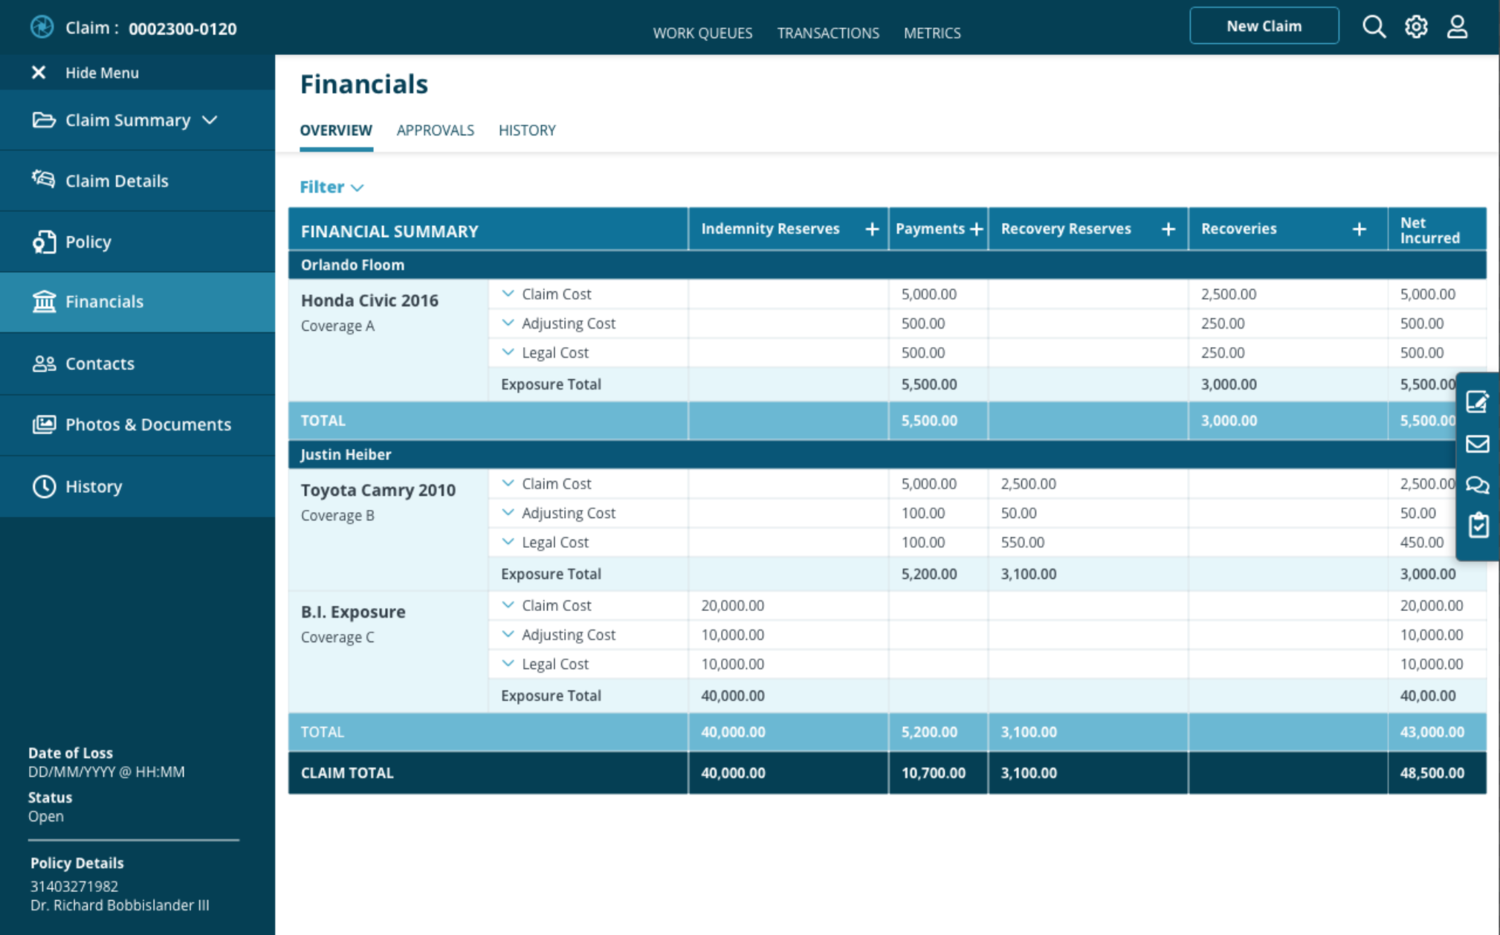 Snapsheet Claims financials overview